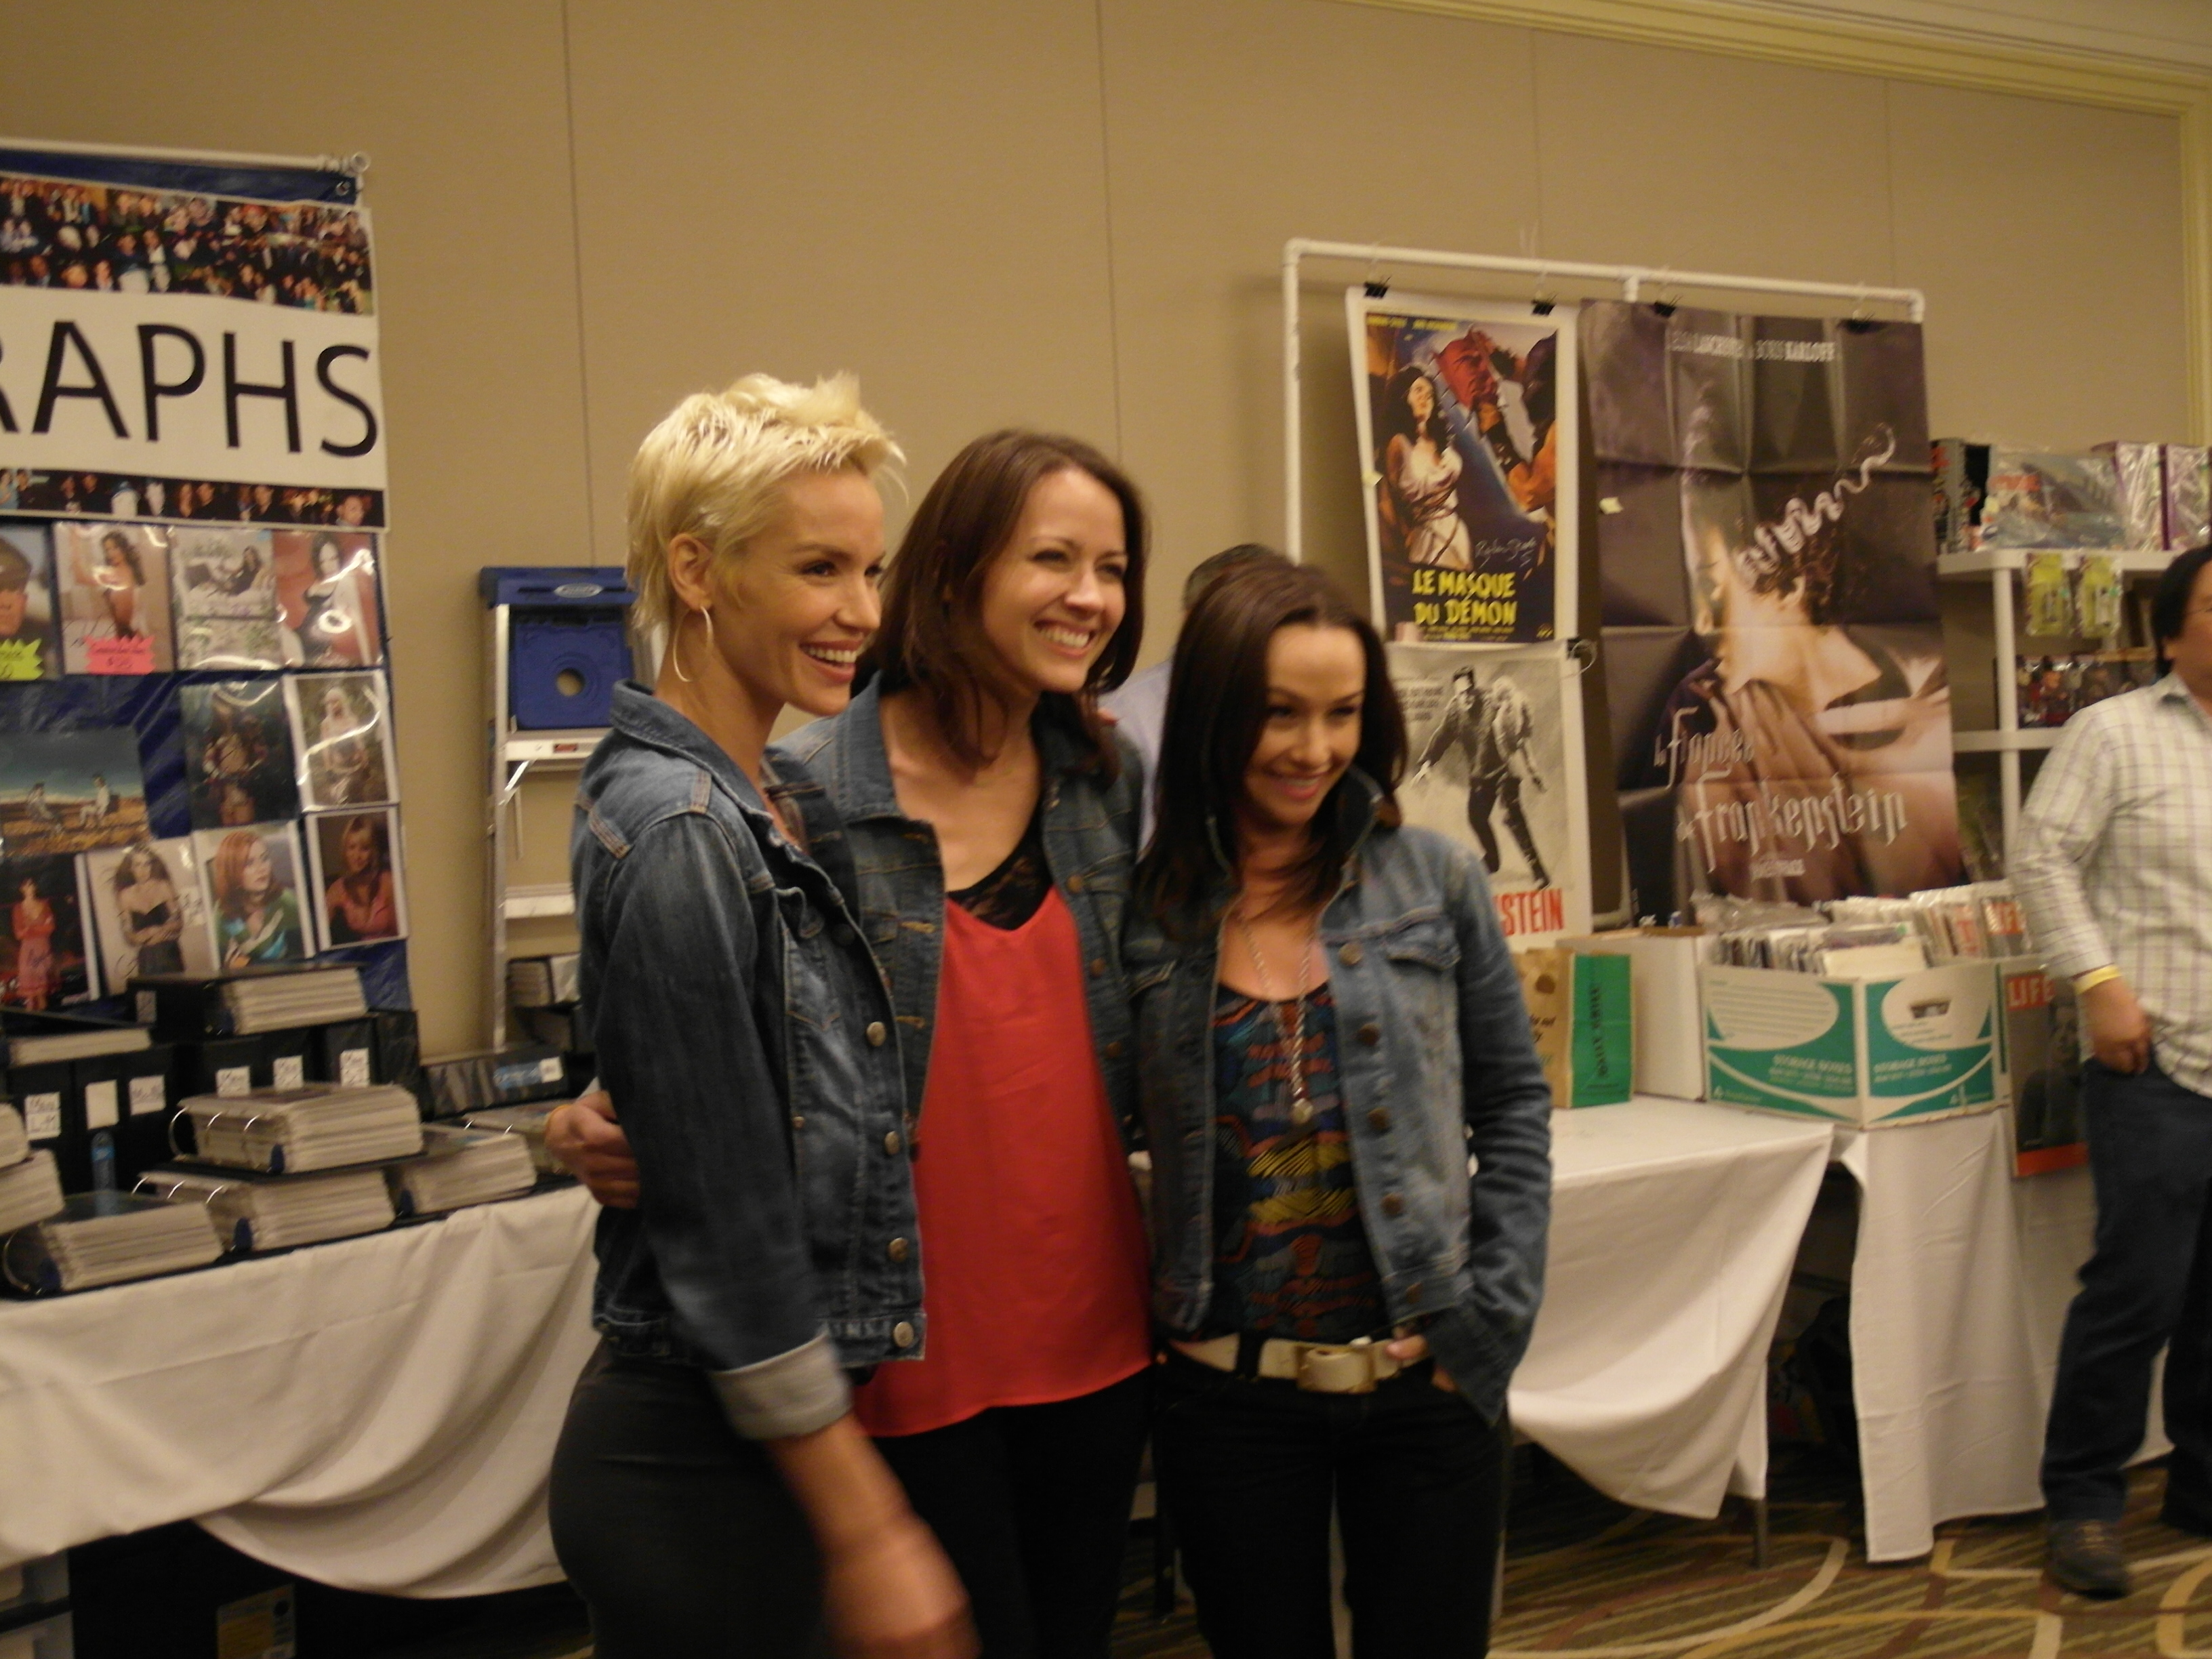 Actress Ashley Scott, actress Amy Acker and actress Danielle Harris attend The Hollywood Show held at Westin LAX Hotel on April 20, 2013 in Los Angeles, California.